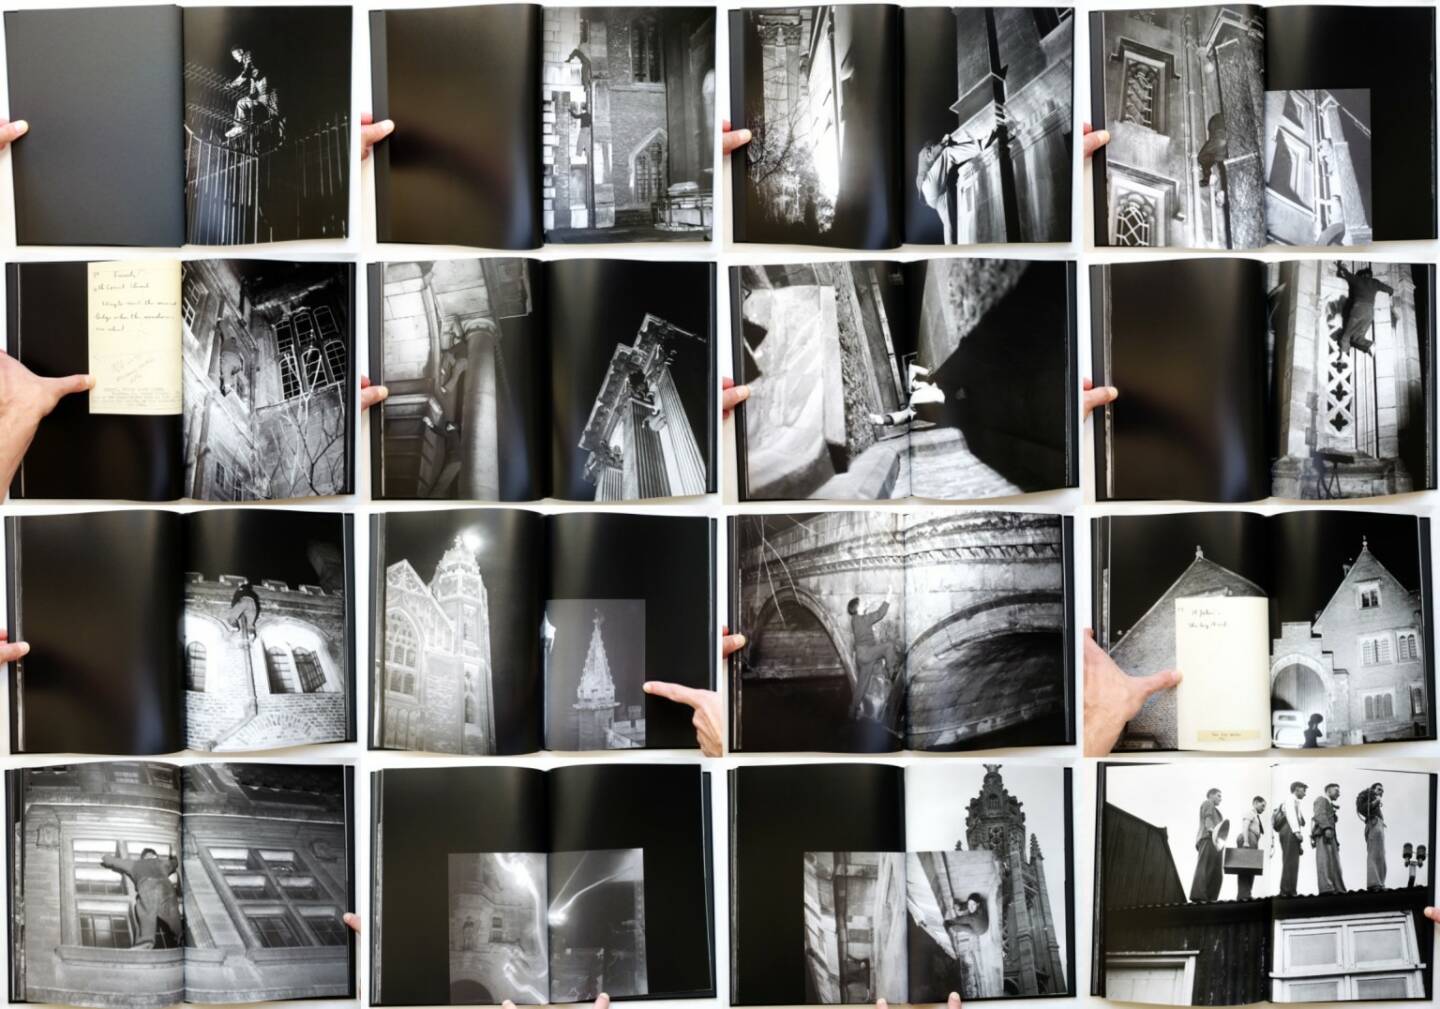 Thomas Mailaender - The Night Climbers of Cambridge, Archive of Modern Conflict 2014, Beispielseiten, sample spreads - http://josefchladek.com/book/thomas_mailaender_-_the_night_climbers_of_cambridge_noel_edward_symington